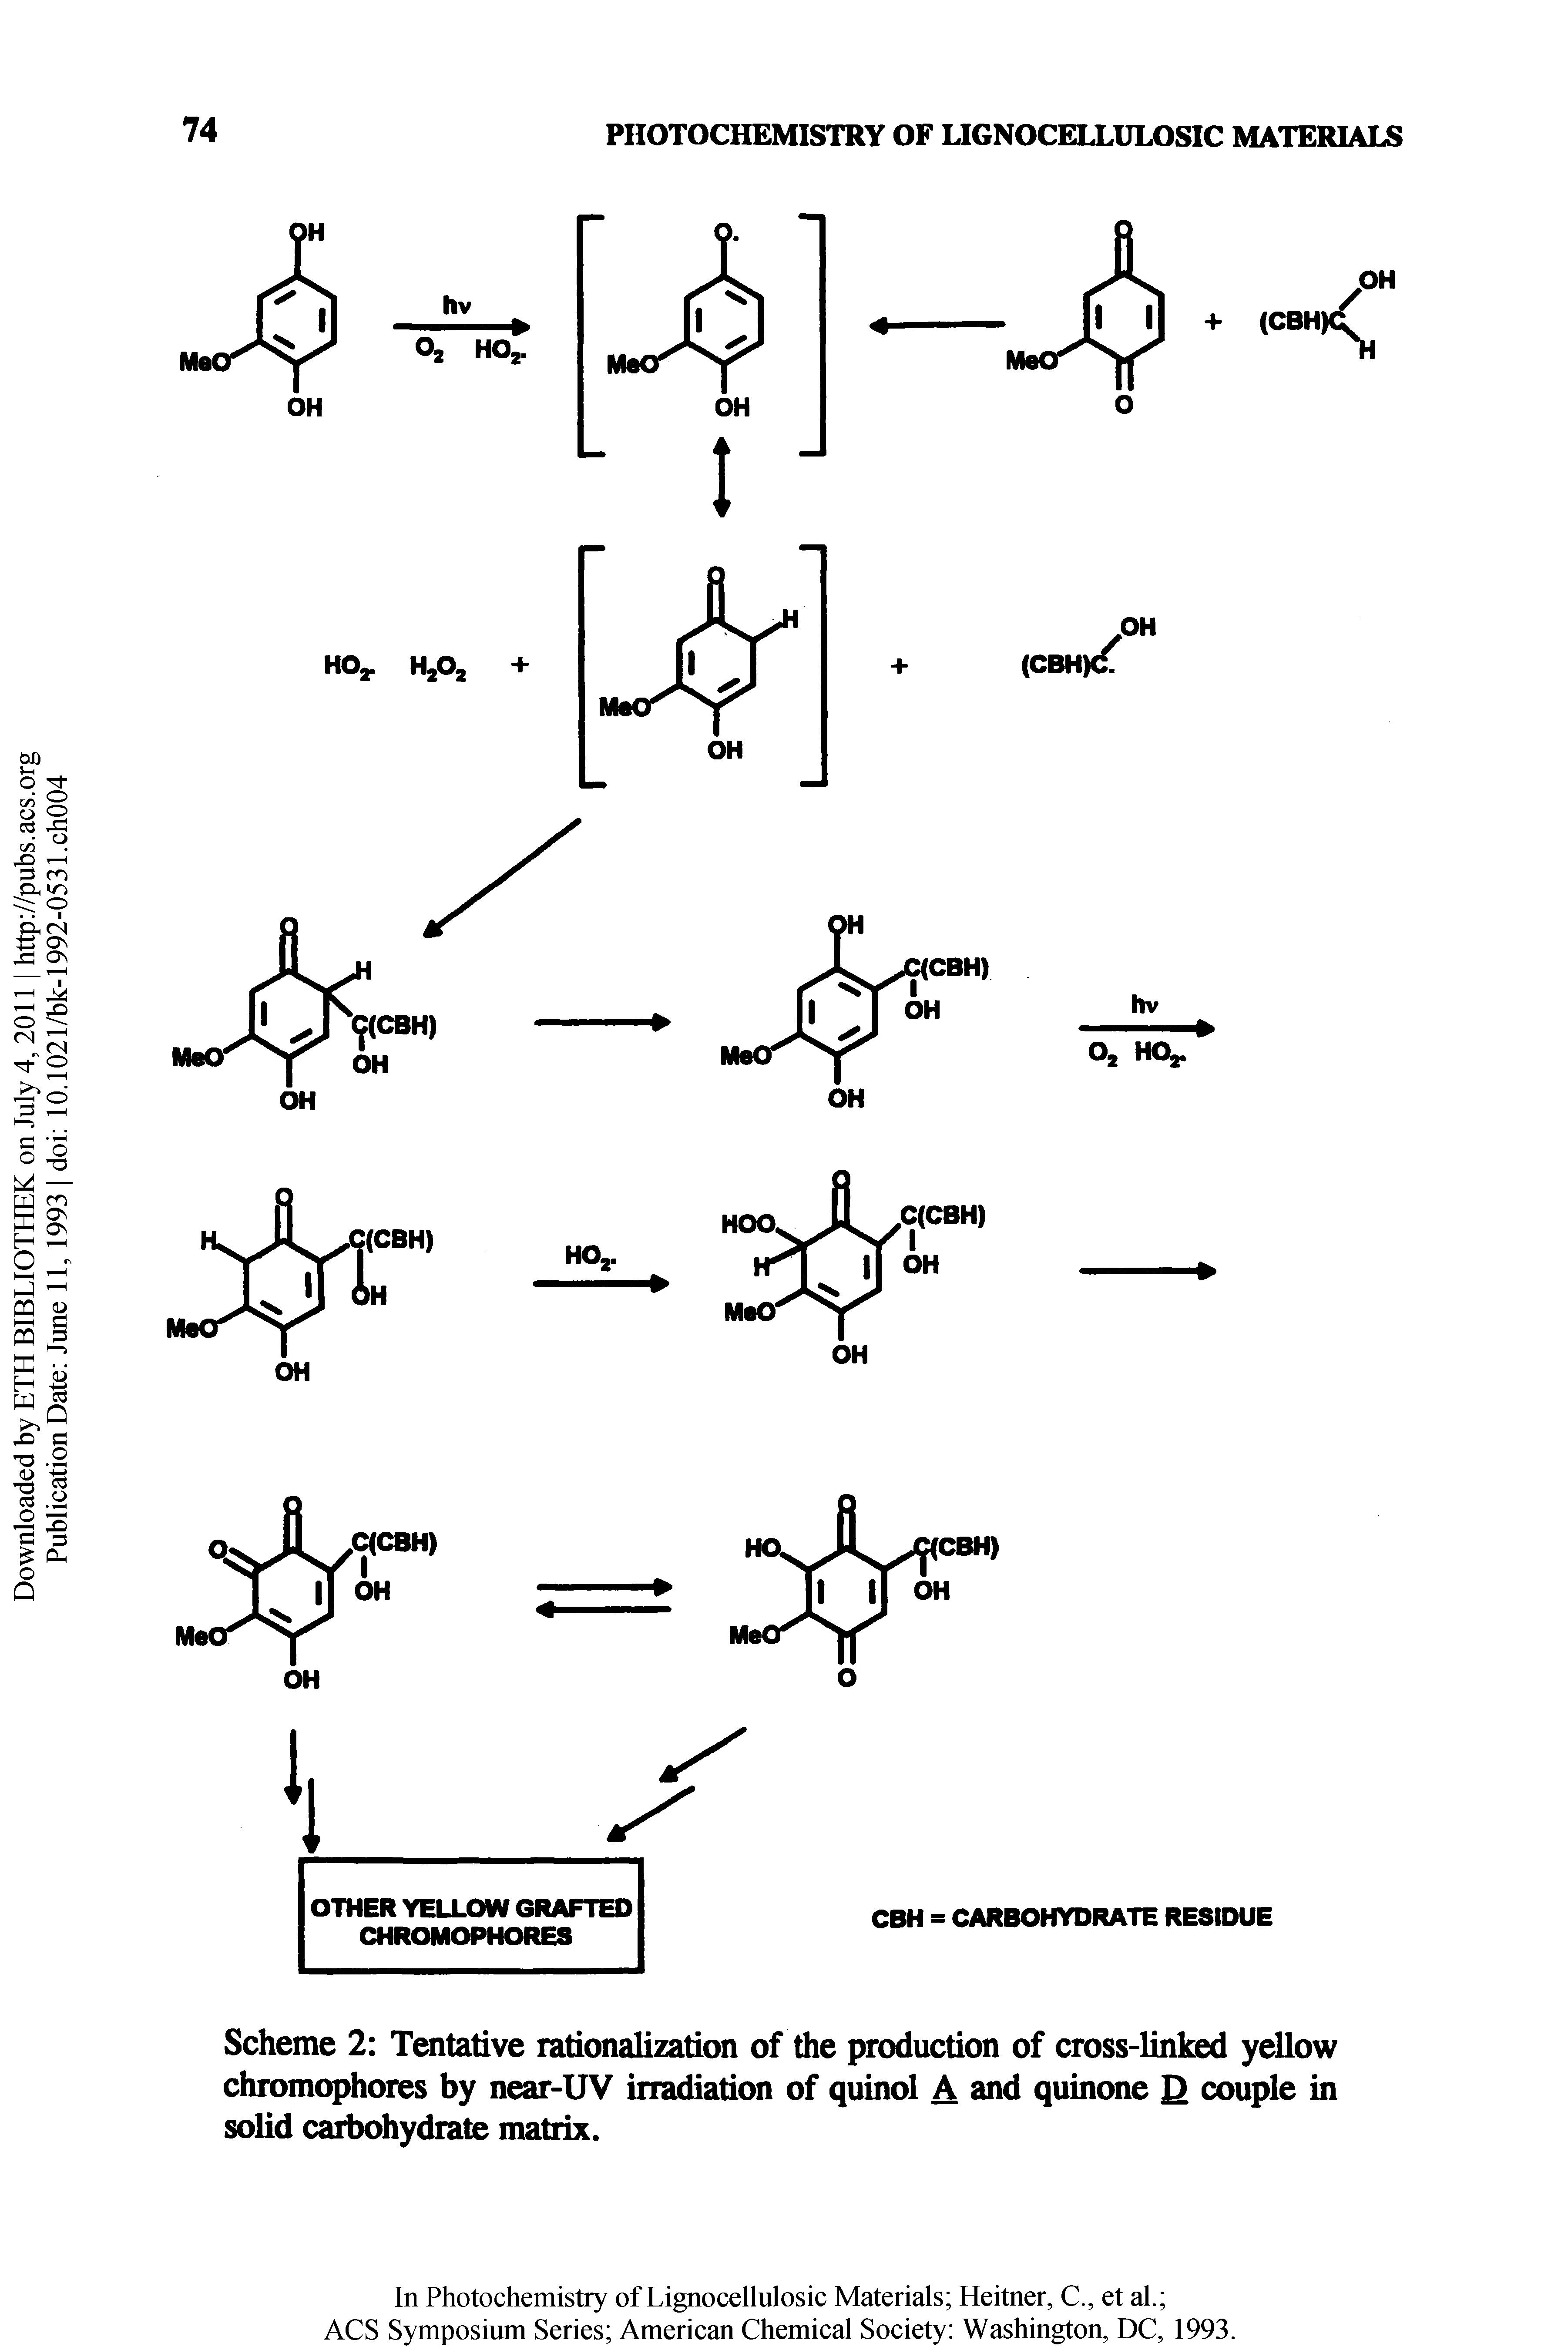 Scheme 2 Tentative rationalization of the production of cross-linked yellow chromophores by near-UV irradiation of quinol A and quinone D couple in solid carbohydrate matrix.